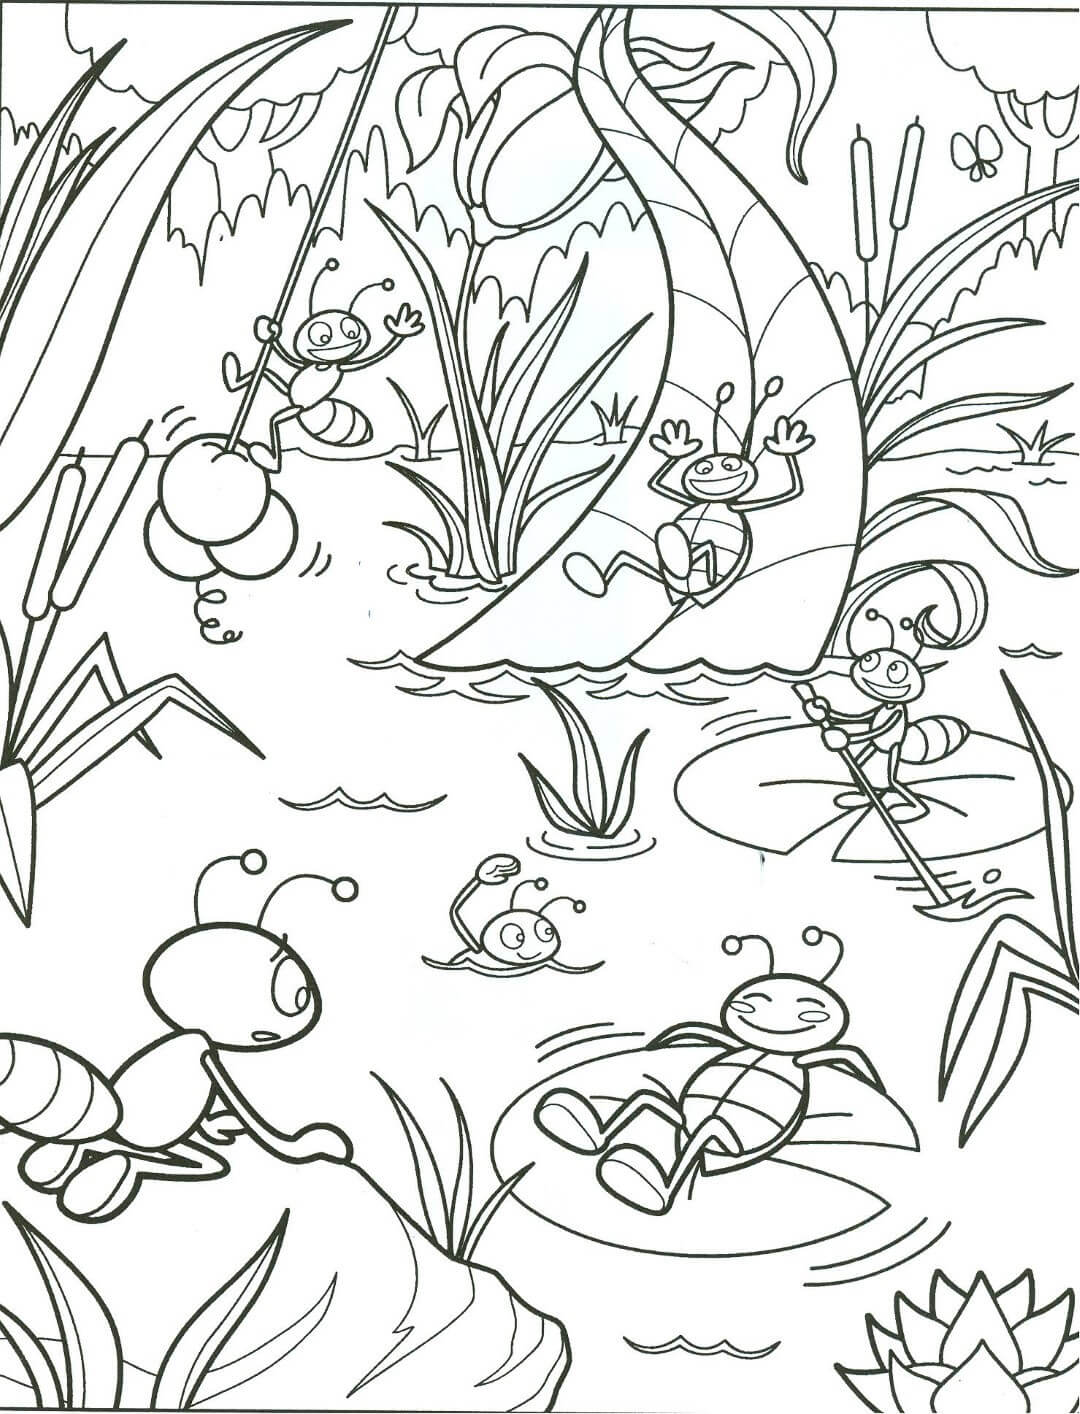 Cute Summer Bugs Coloring Page